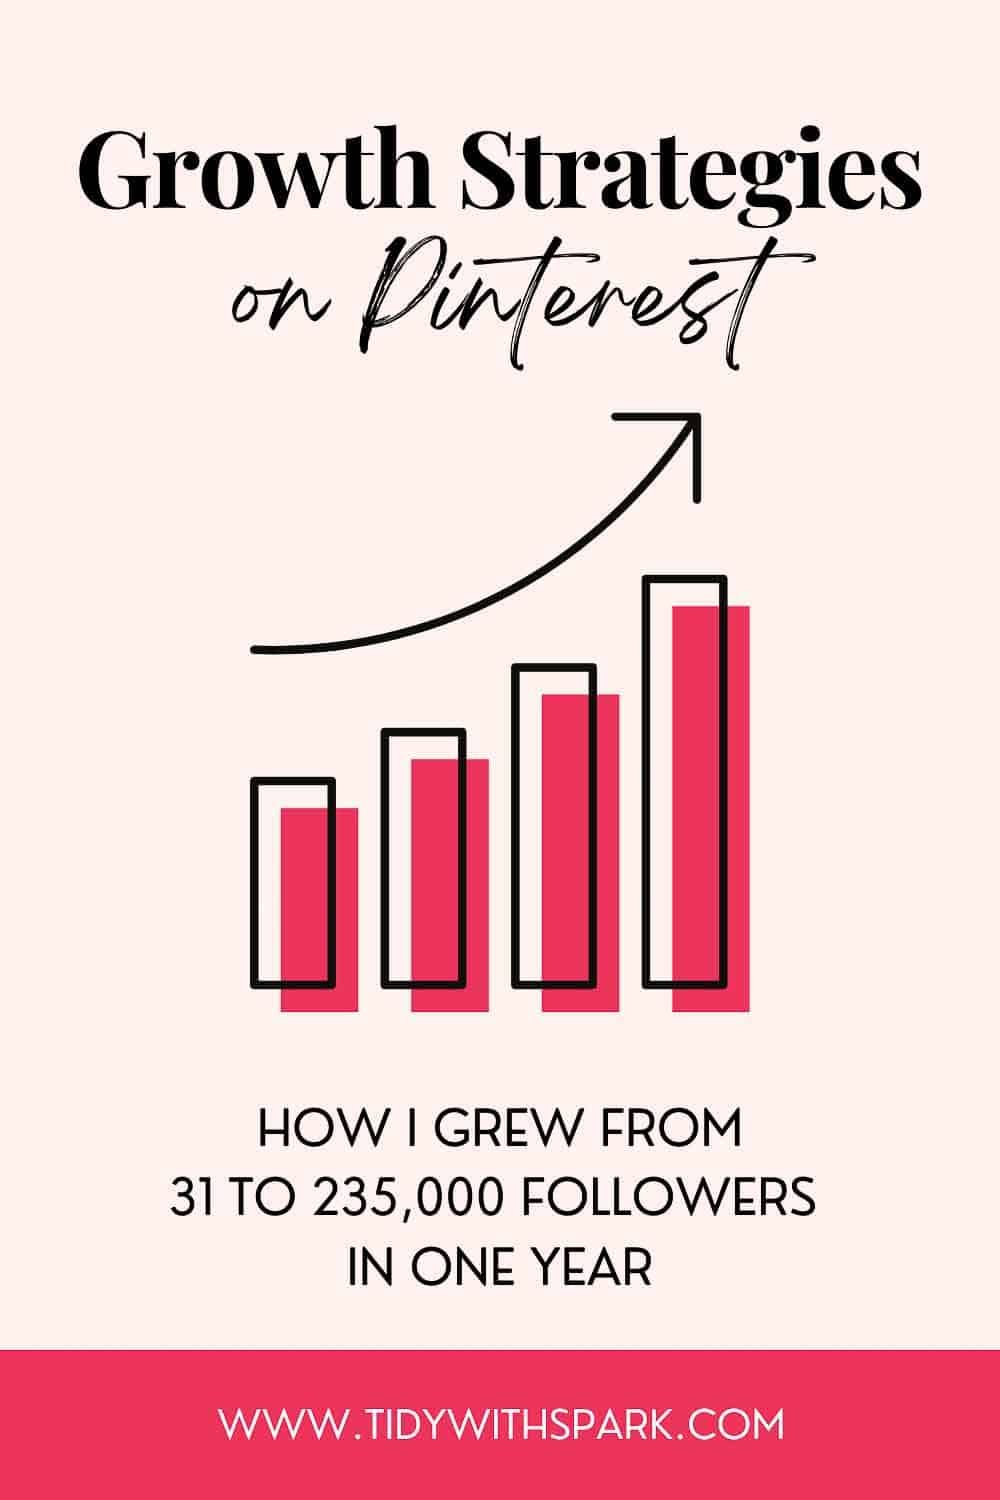 Promotional image for Getting followers on Pinterest for tidy with spark blog